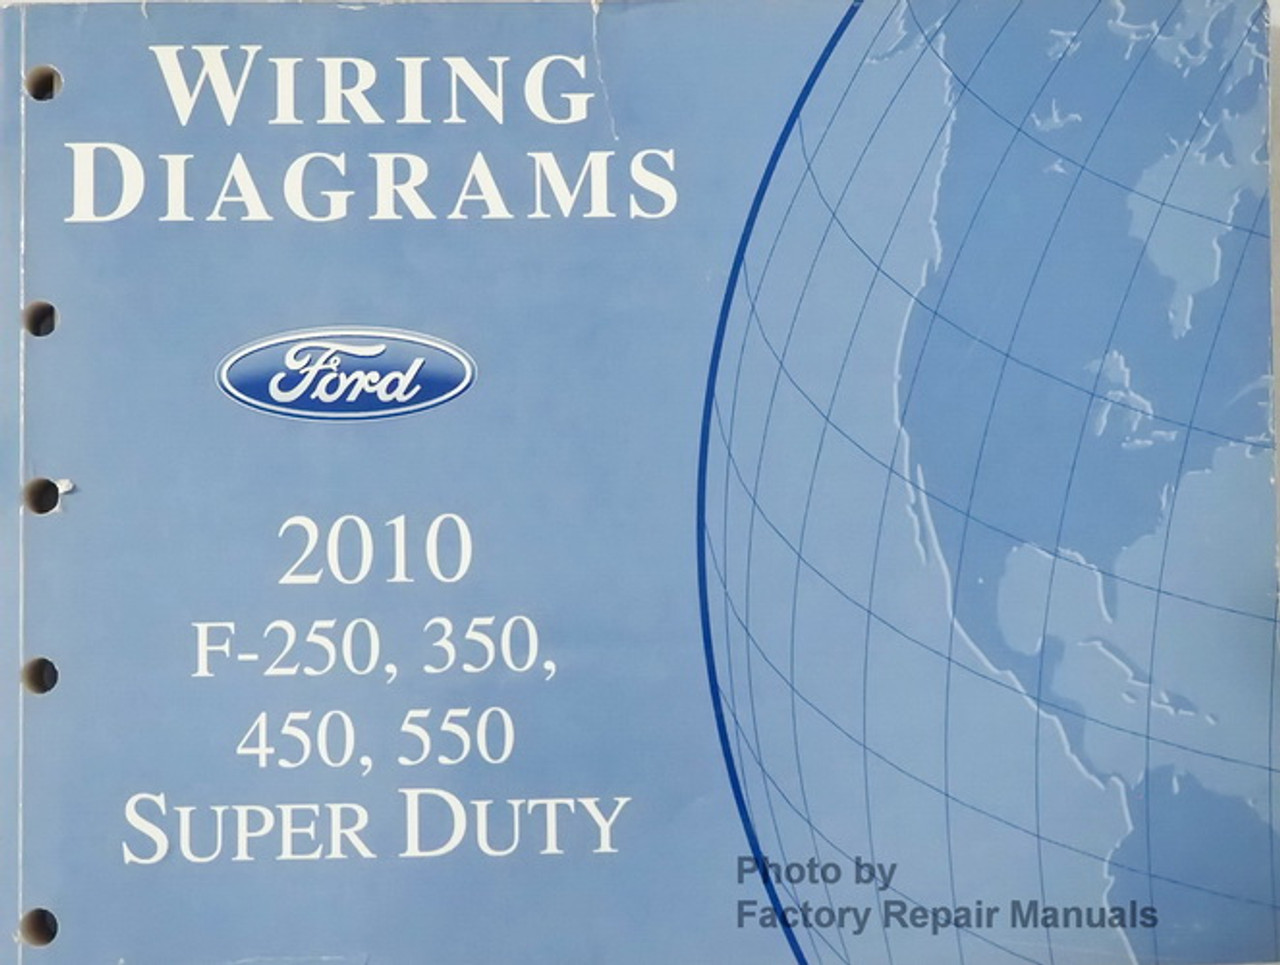 2010 Ford F250 F350 F450 F550 Super Duty Electrical Wiring Diagrams Manual  - Factory Repair Manuals Ford F-450 Wiring-Diagram Factory Repair Manuals